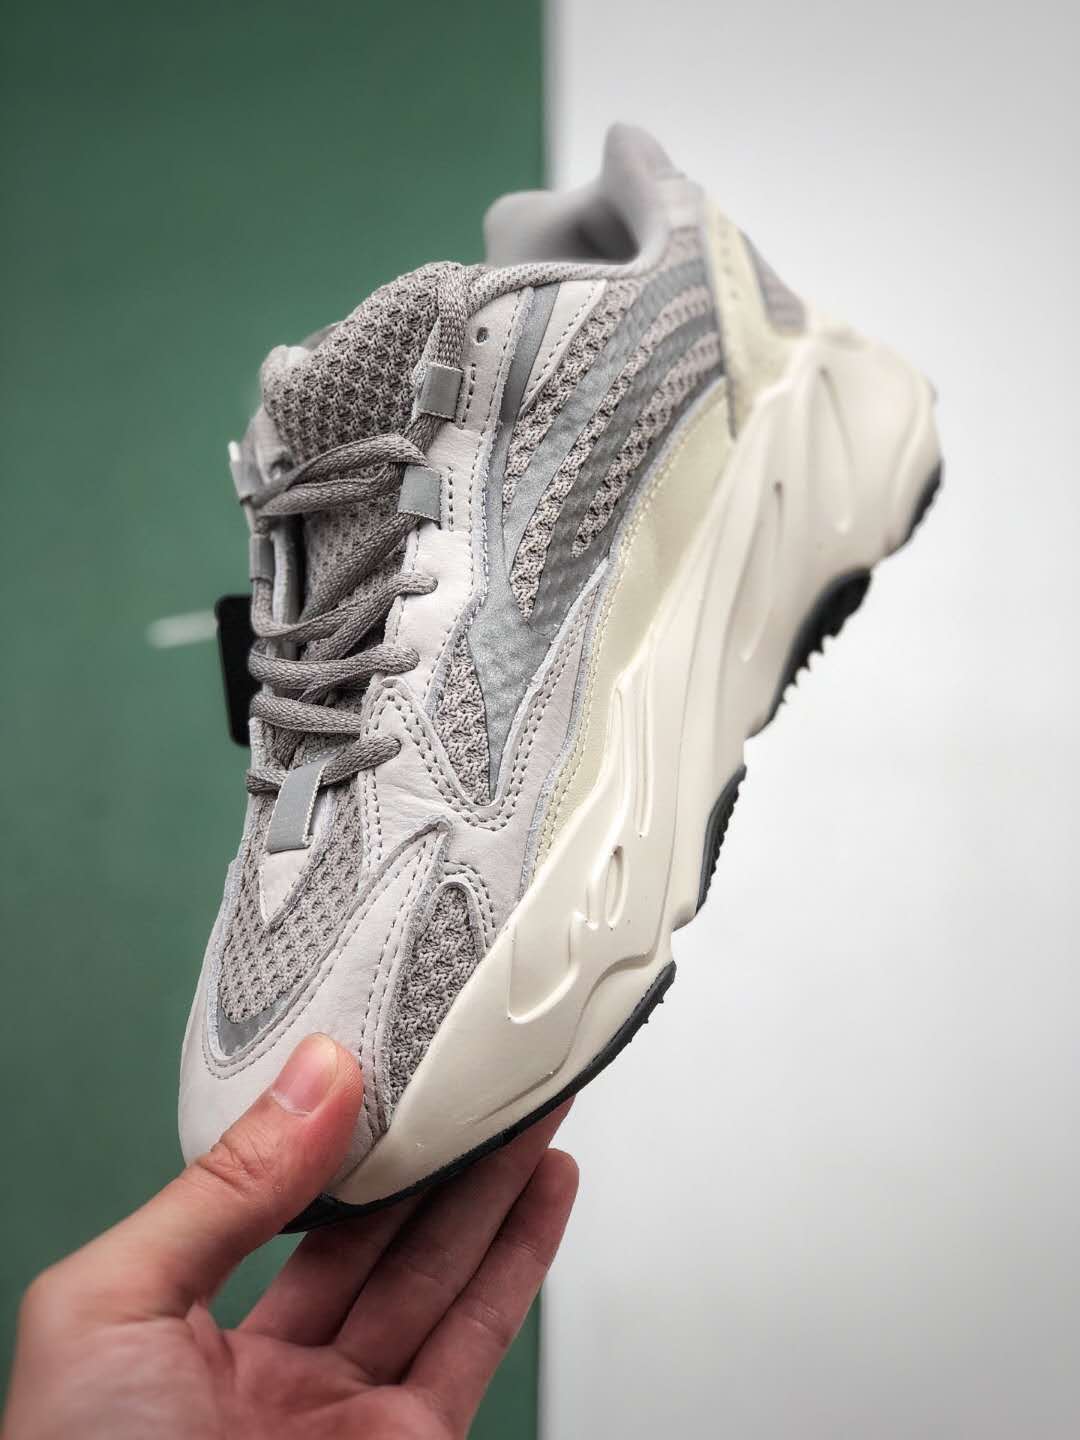 Adidas Yeezy Boost 700 V2 Static - Premium Sneaker - Limited Edition